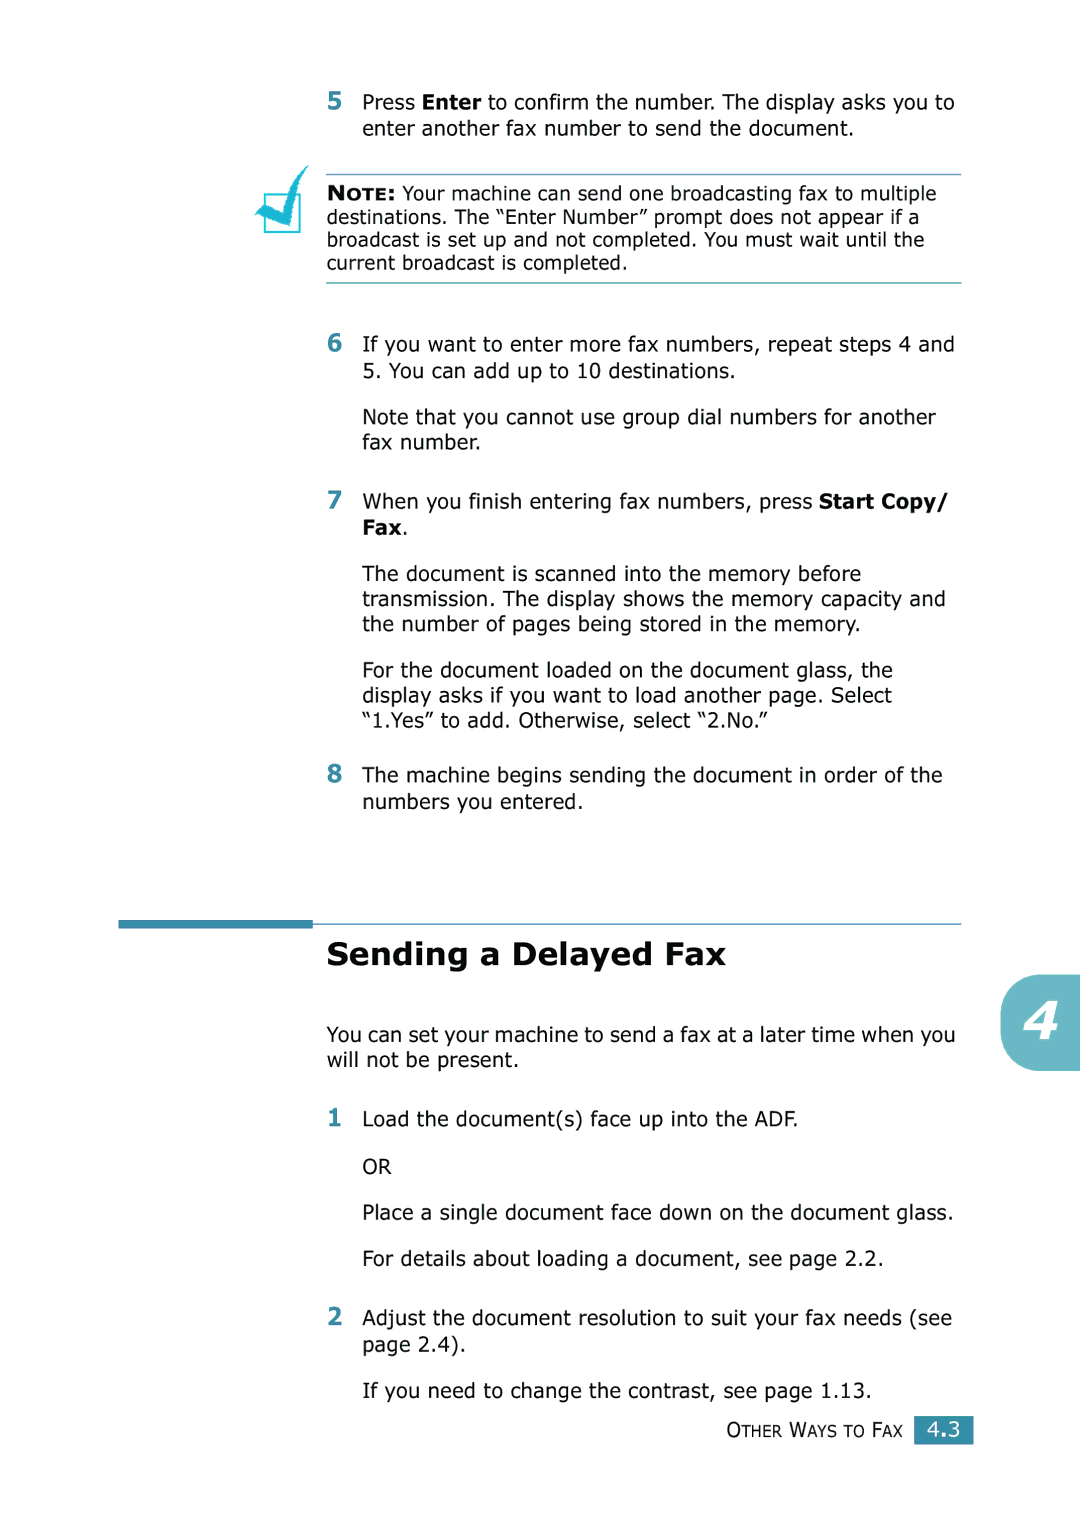 Xerox WorkCentre PE16 manual Sending a Delayed Fax, Will not be present Load the documents face up into the ADF 